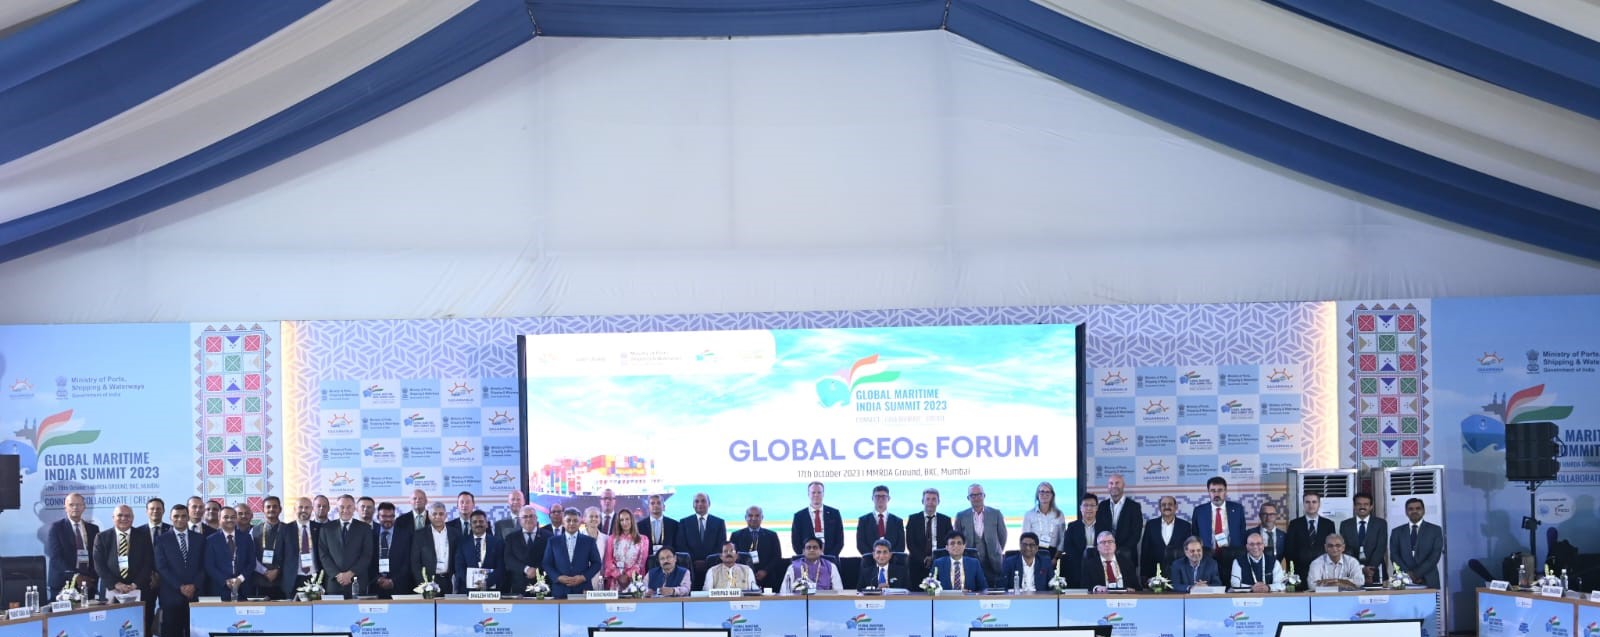 CMD, GRSE at the Global CEOs Forum during the 3rd edition of Global Maritime India Summit 2023, Mumbai on 17 Oct 23